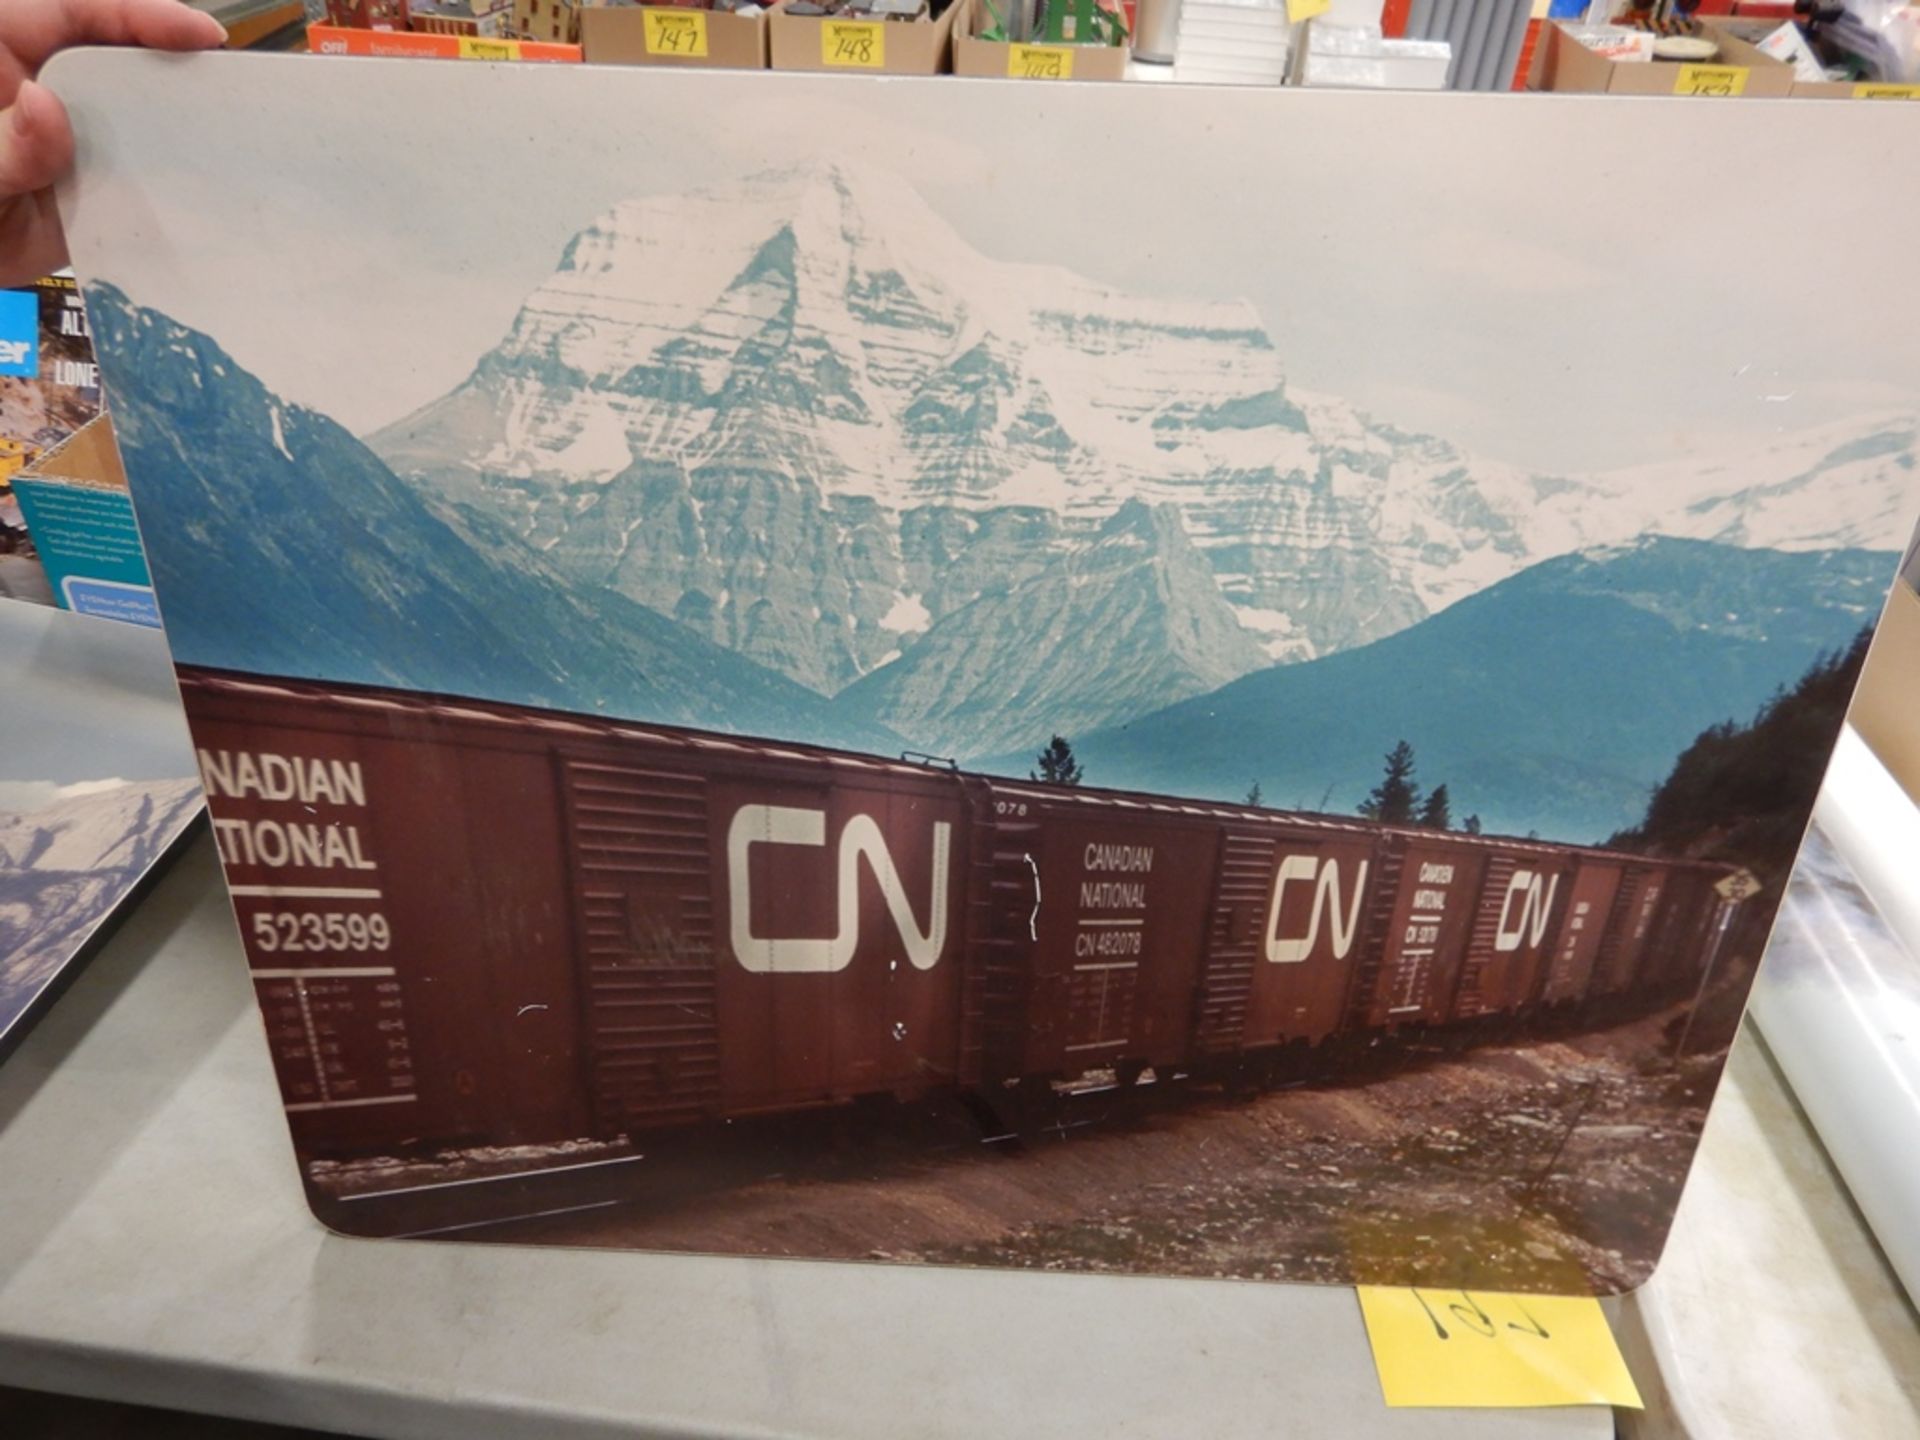 2-SCENERY PICTURES OF CN FREIGHT CARS - Image 2 of 2